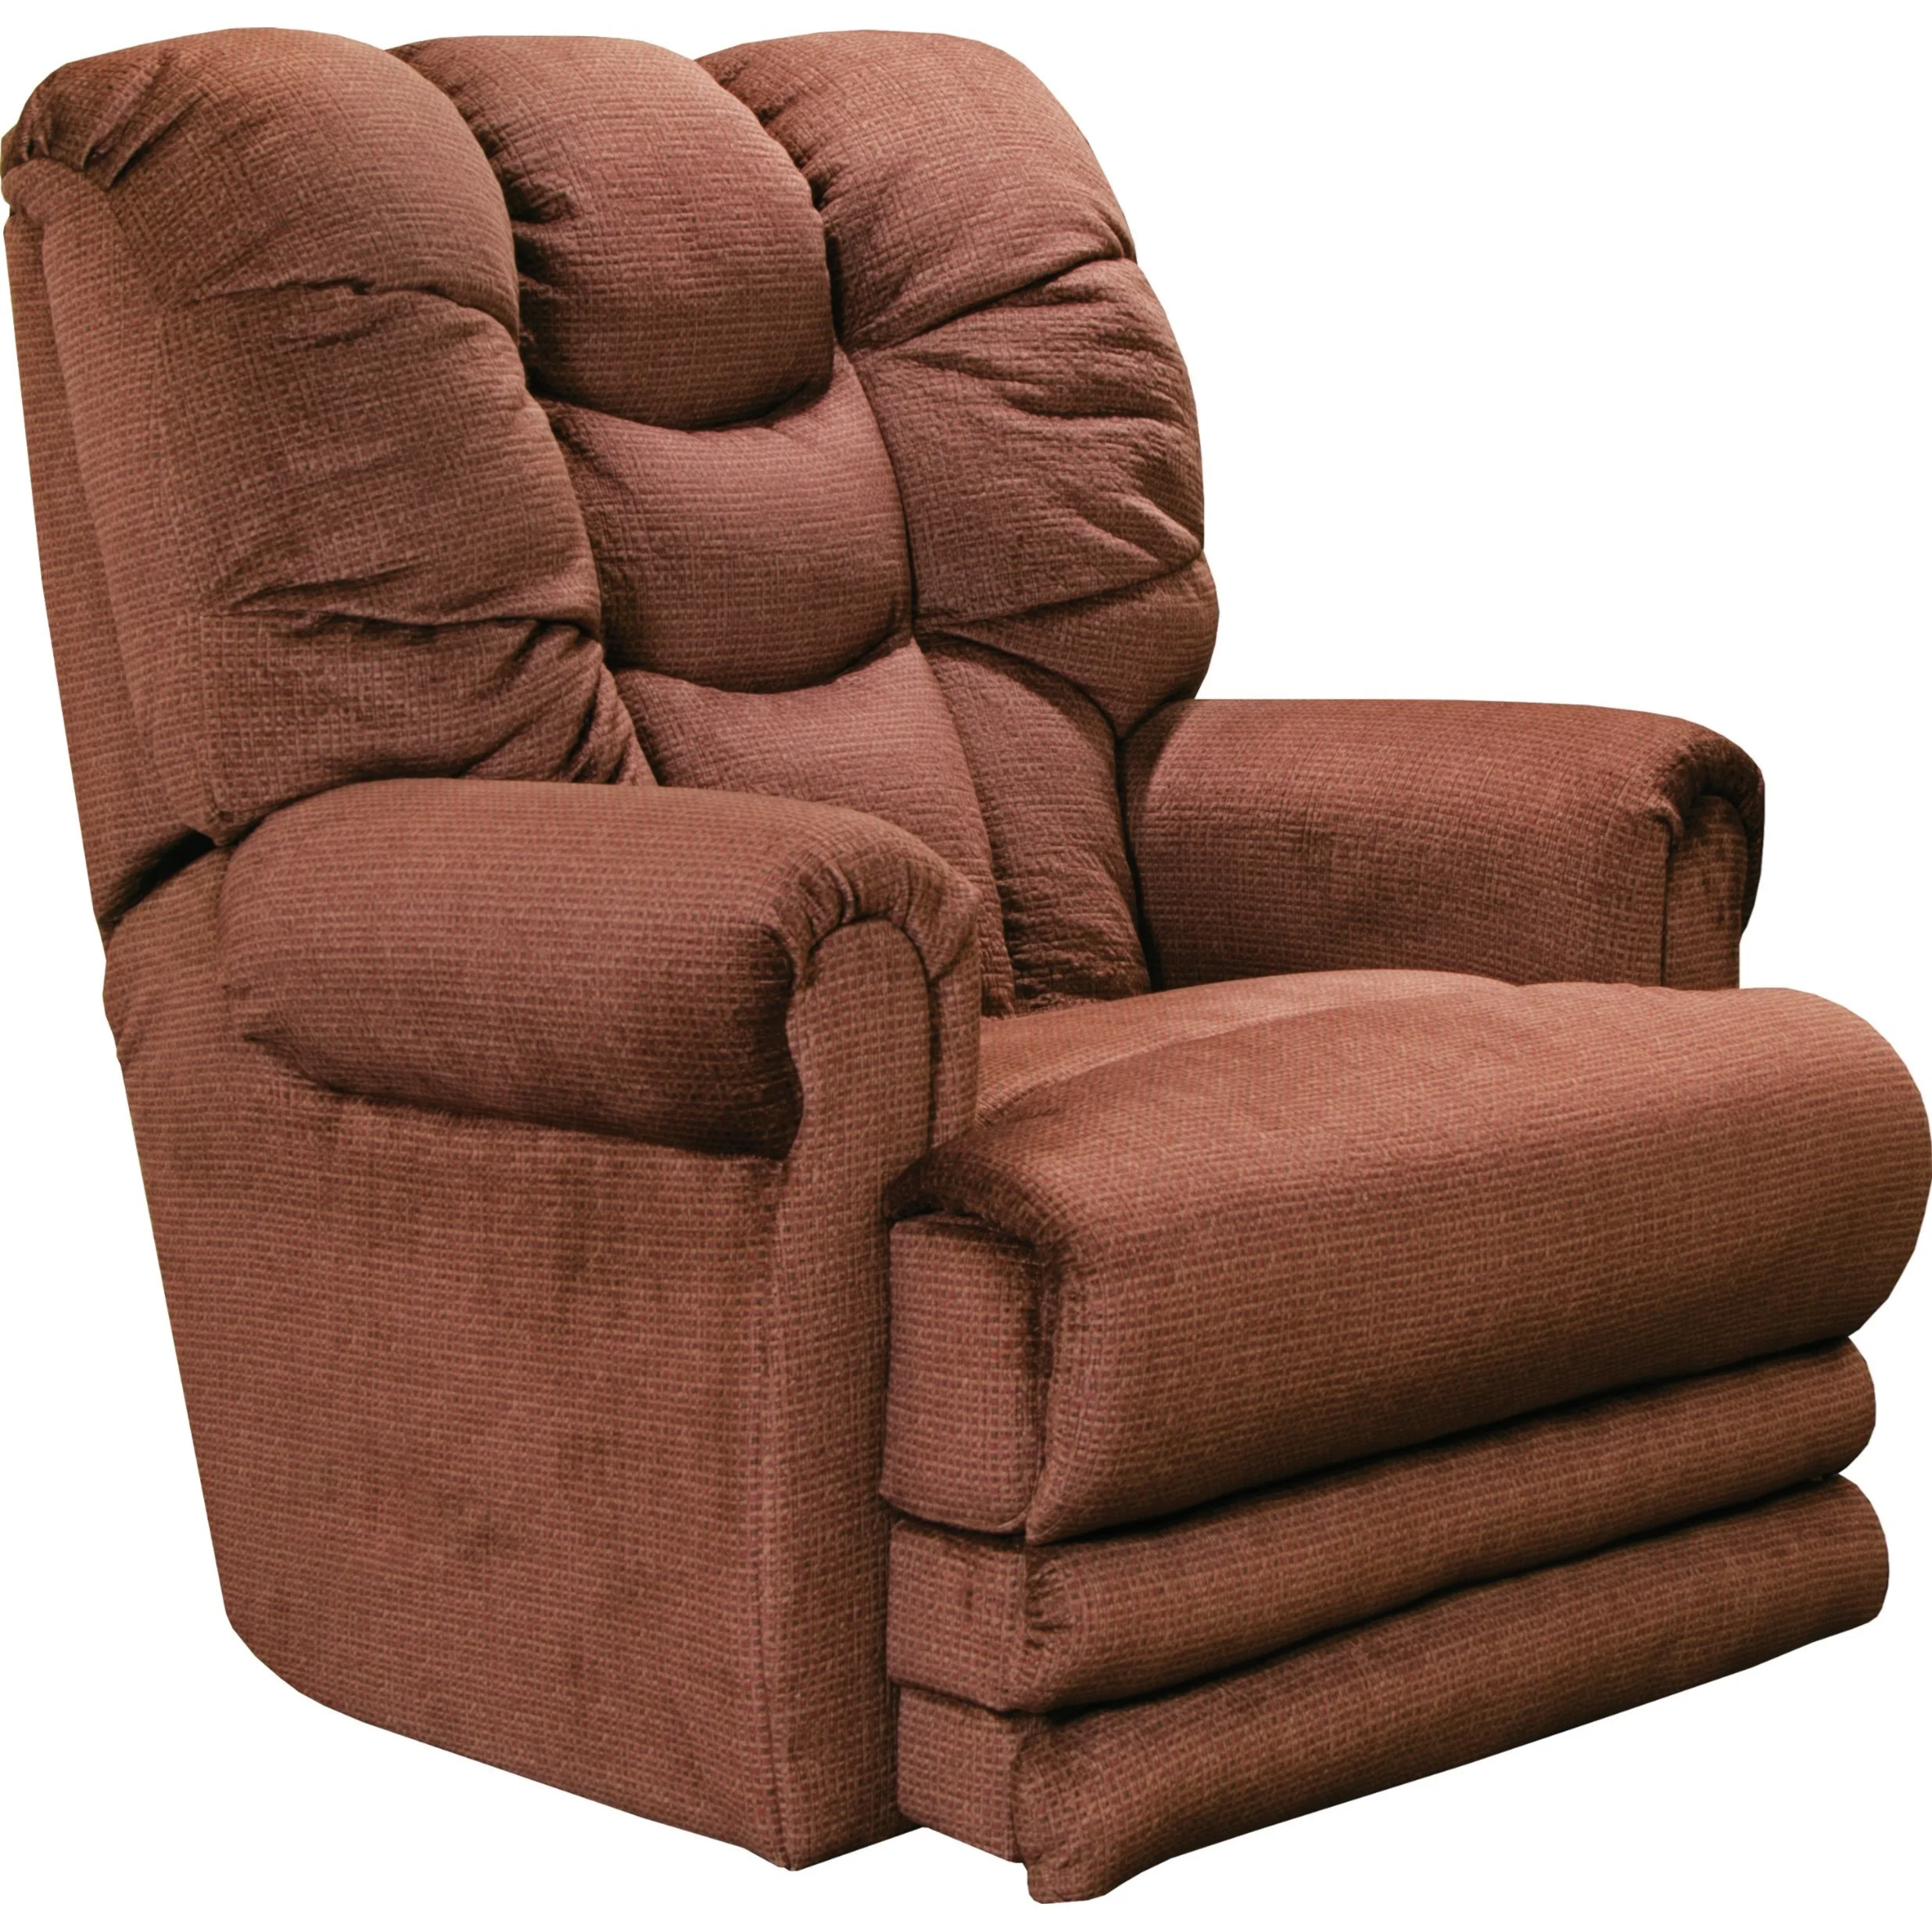 https://imageresizer.furnituredealer.net/img/remote/images.furnituredealer.net/img/products/catnapper/color/motion%20chairs%20and%20recliners_64257-7-merlot-b1.jpg?format=webp&quality=85